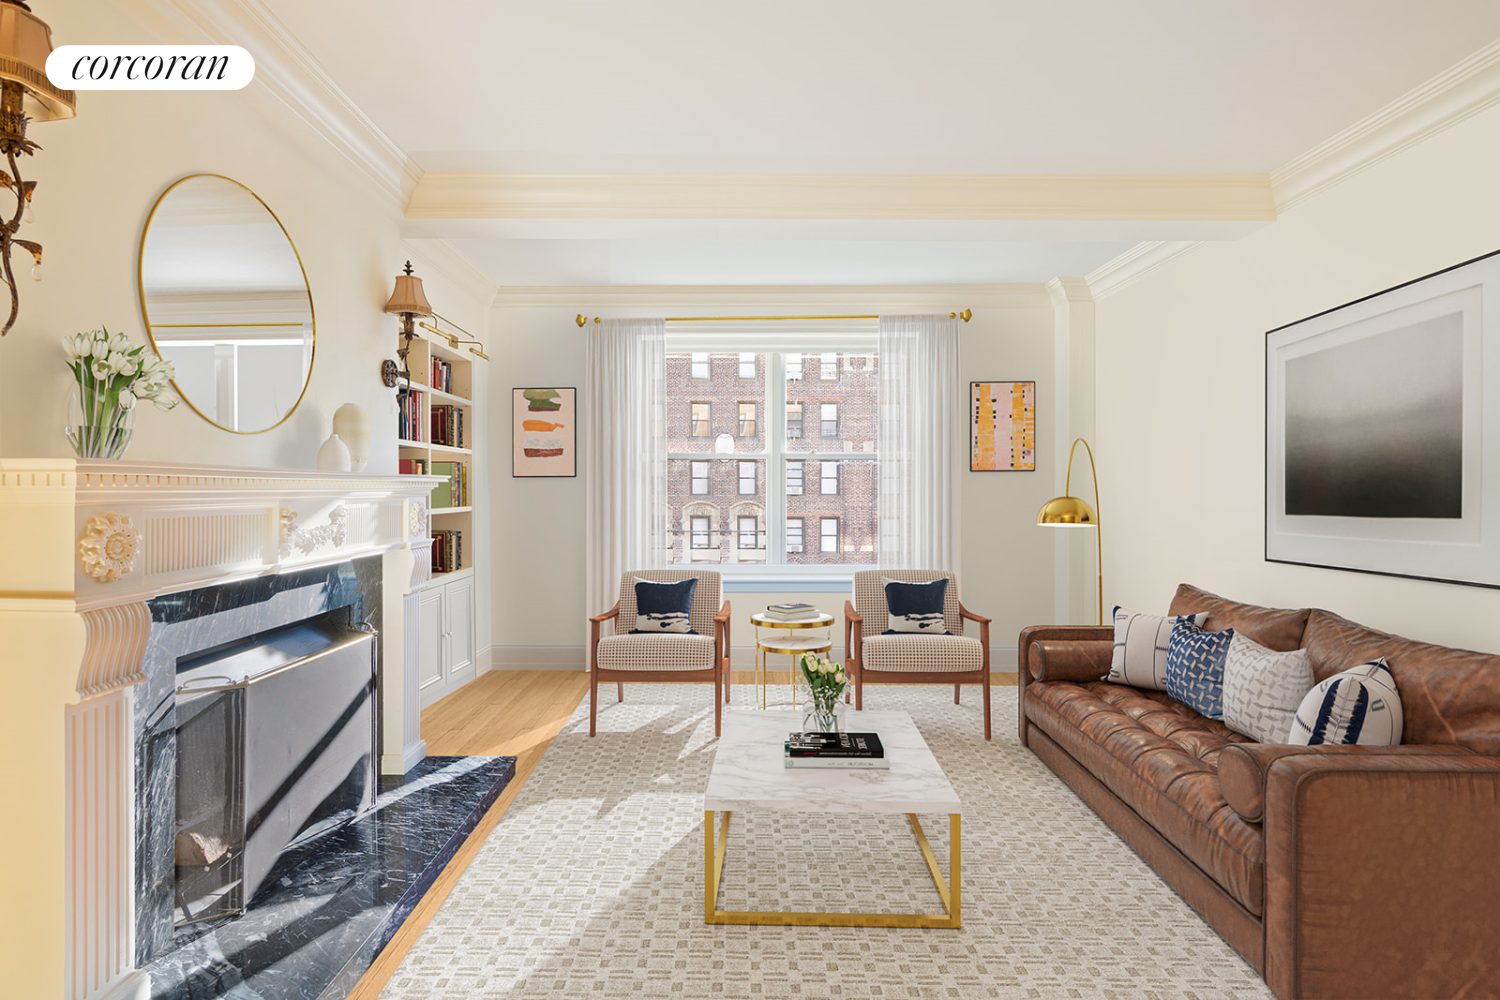 425 East 86th Street 15Bc, Yorkville, Upper East Side, NYC - 3 Bedrooms  
3 Bathrooms  
8 Rooms - 